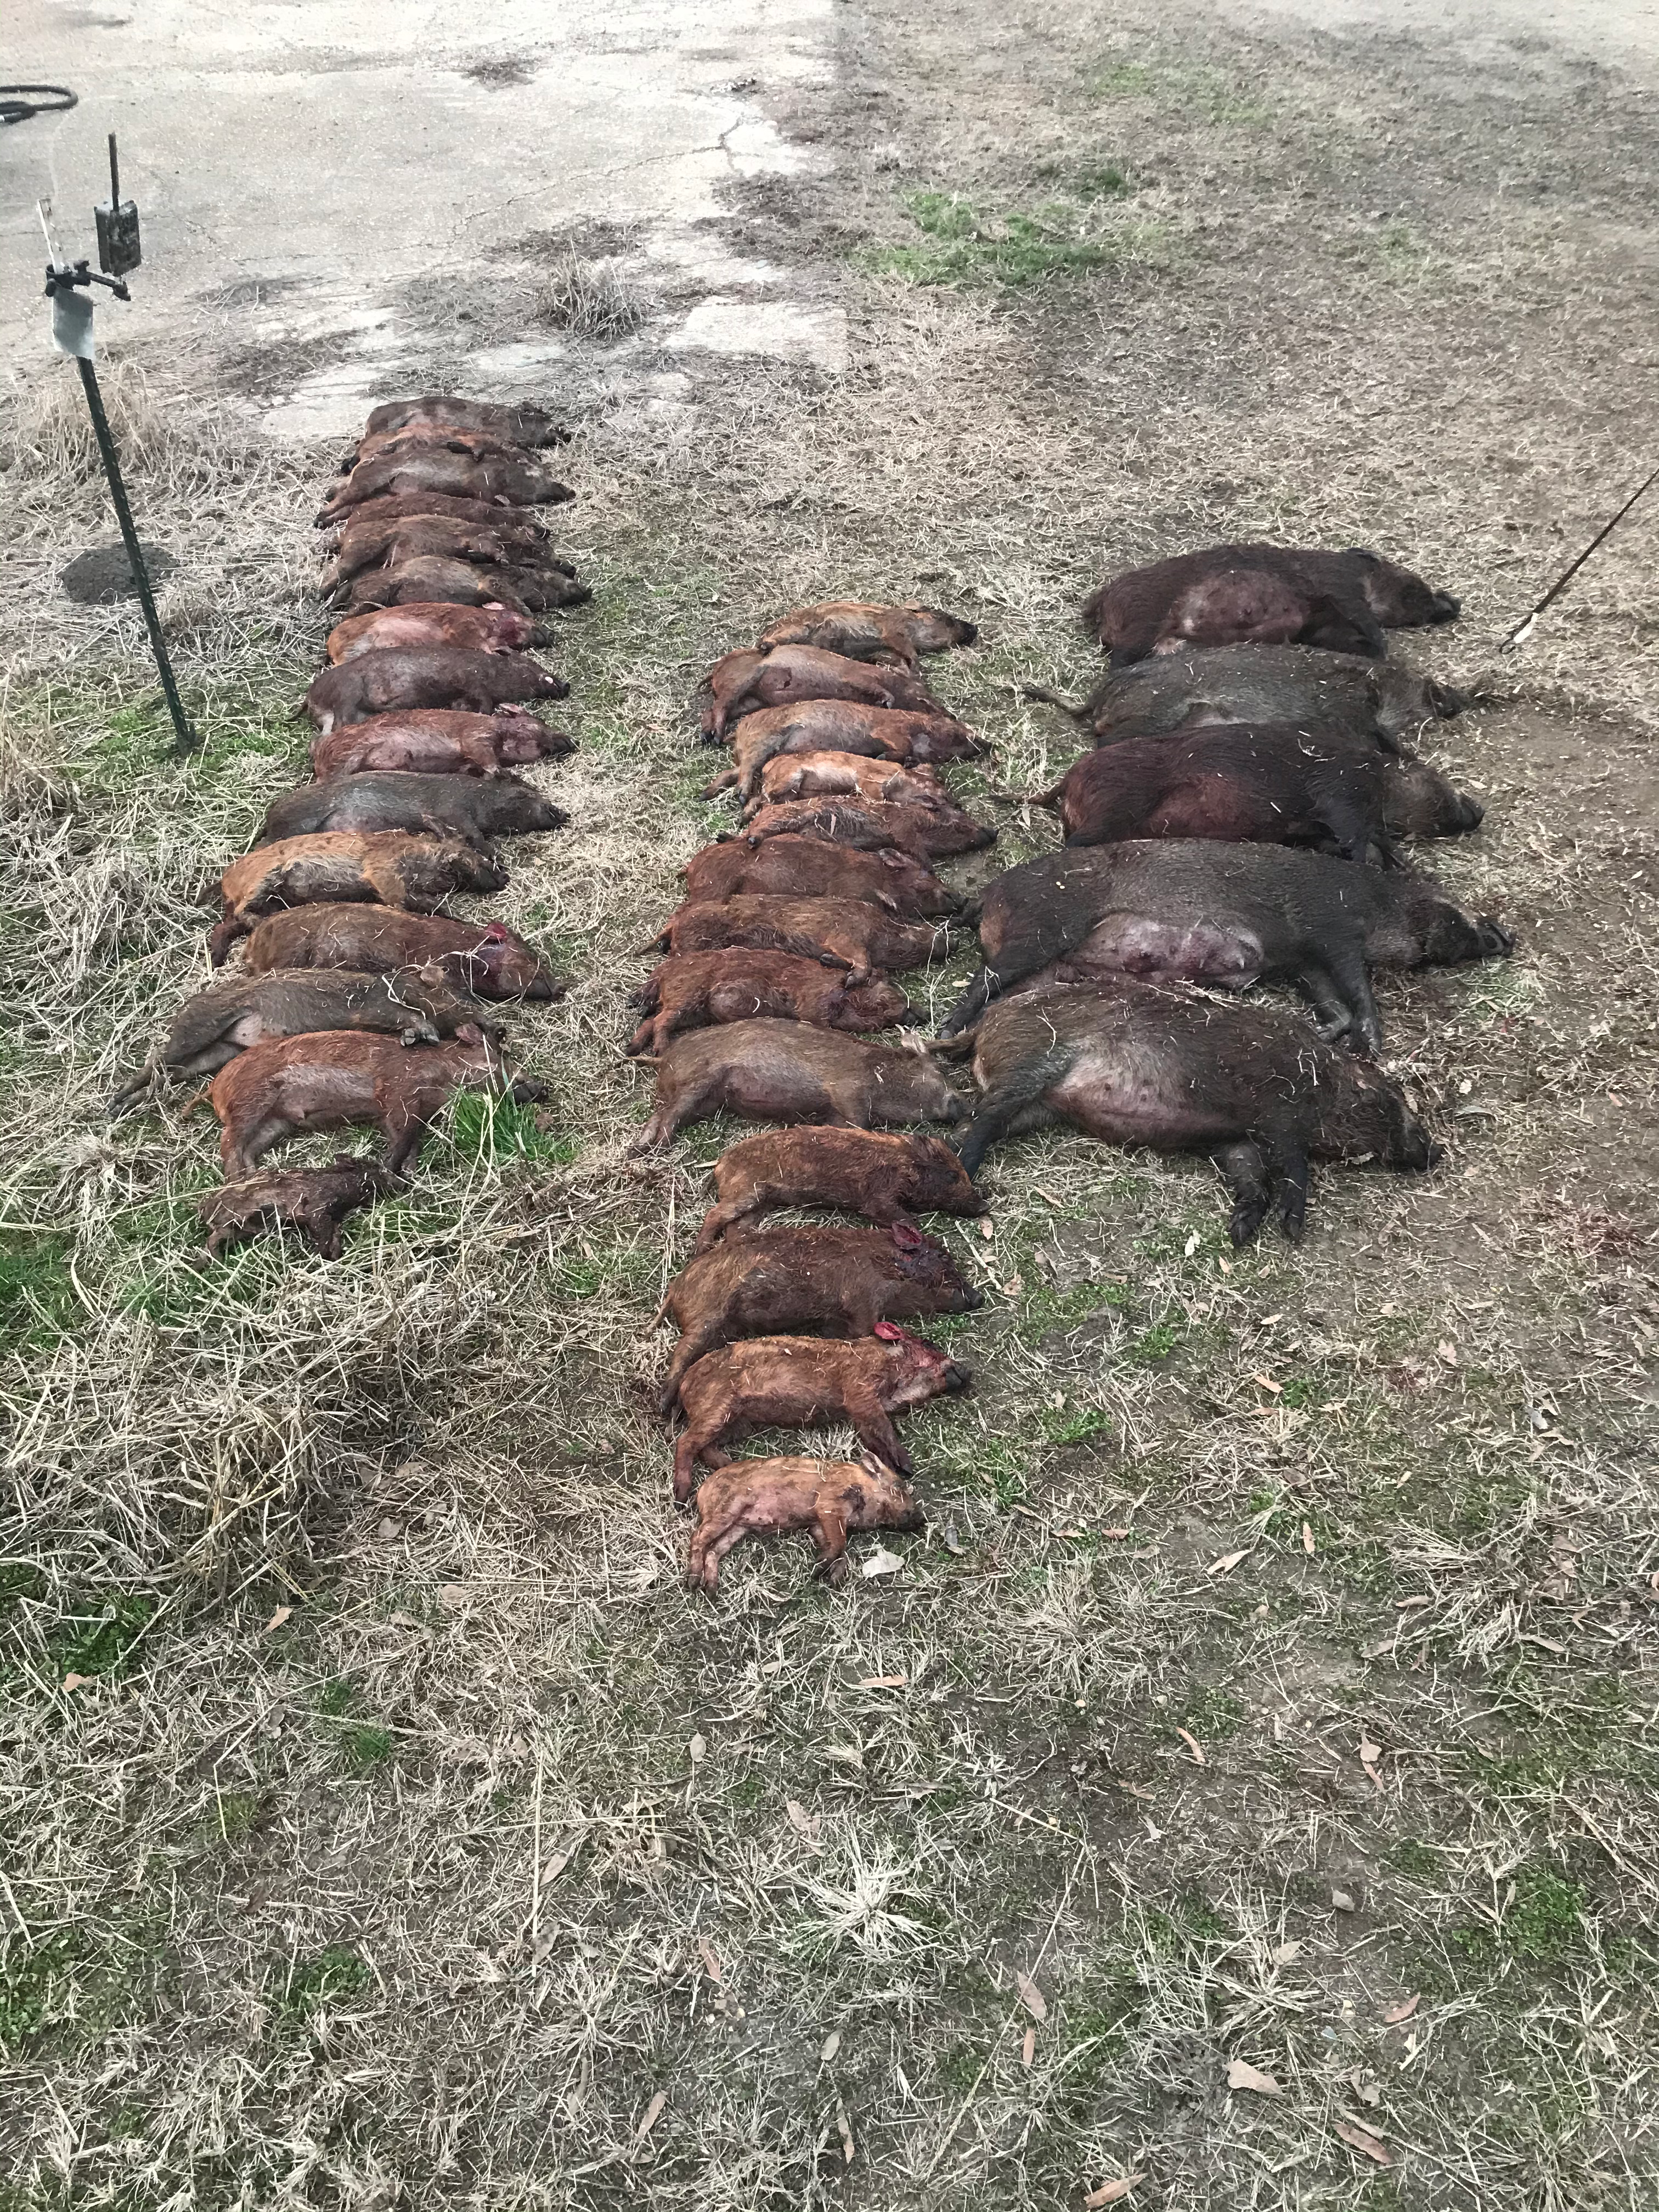 Load It Up. Lay Em Out. Pig Brig: 115, Pigs: 0